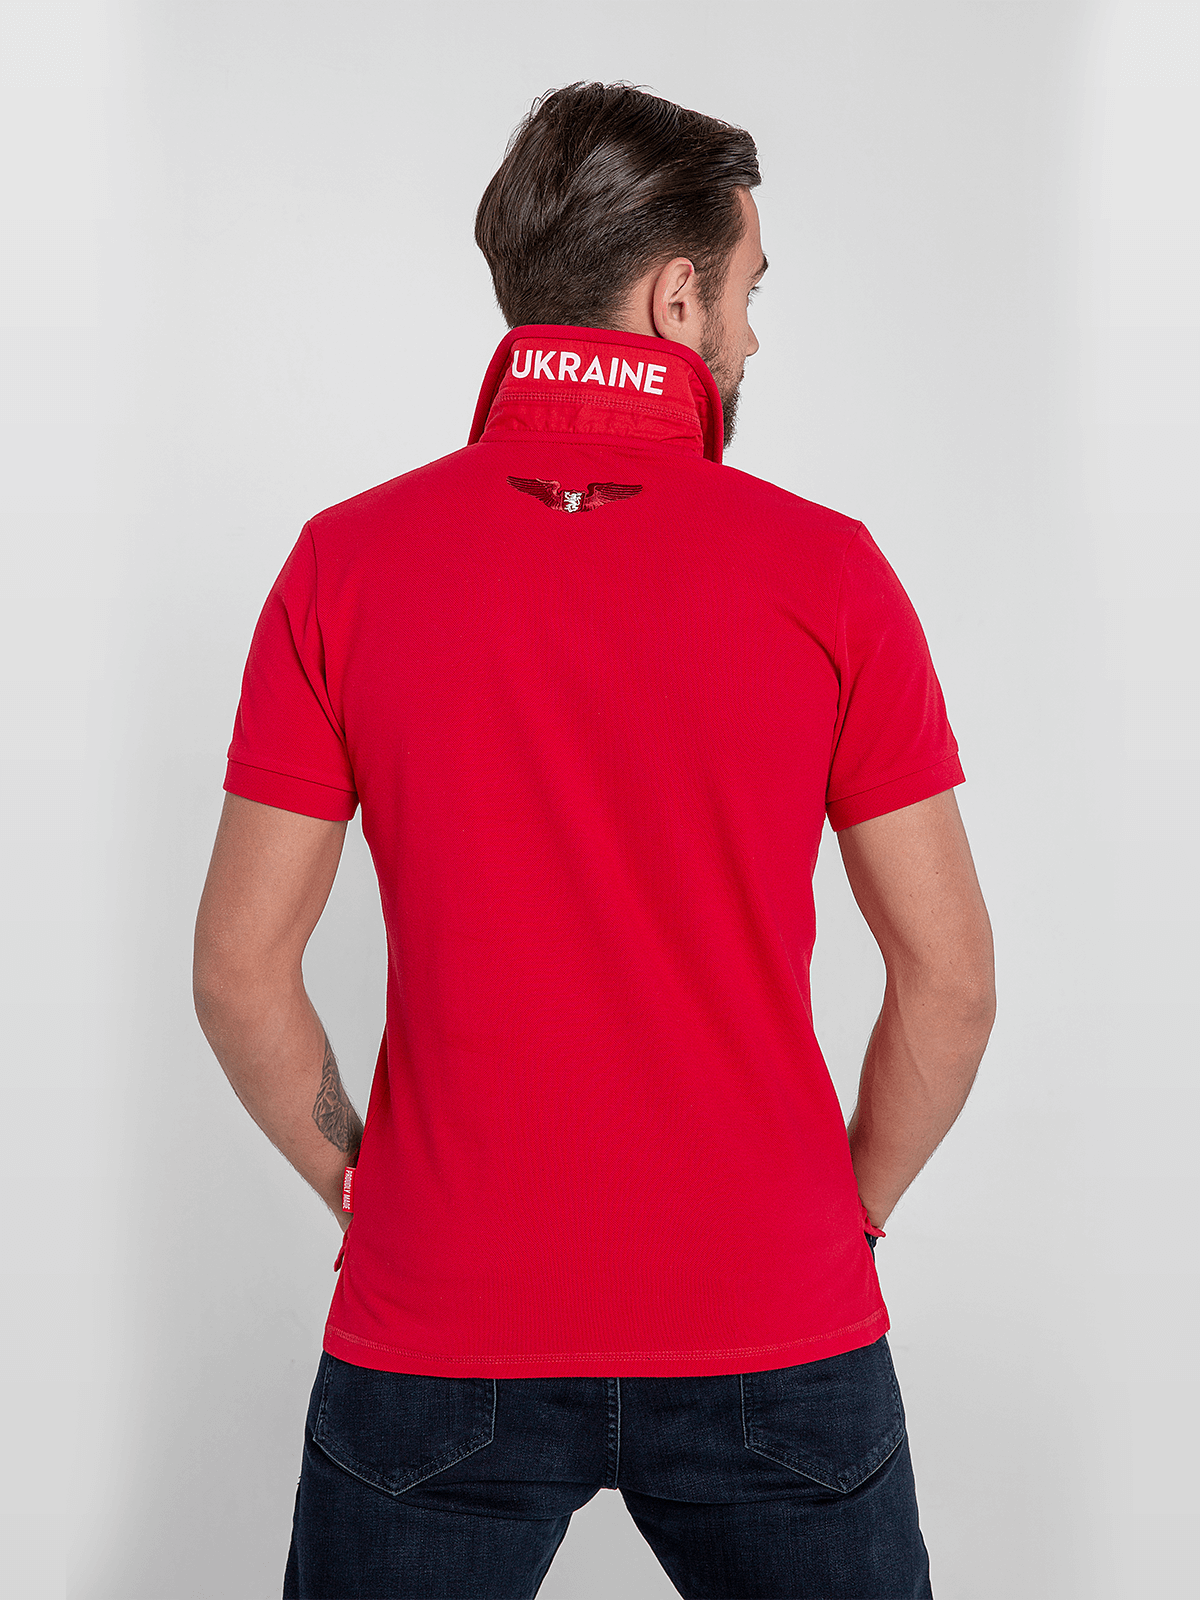 Men's Polo Shirt Wings. Color red. 
Pique fabric: 100% cotton.